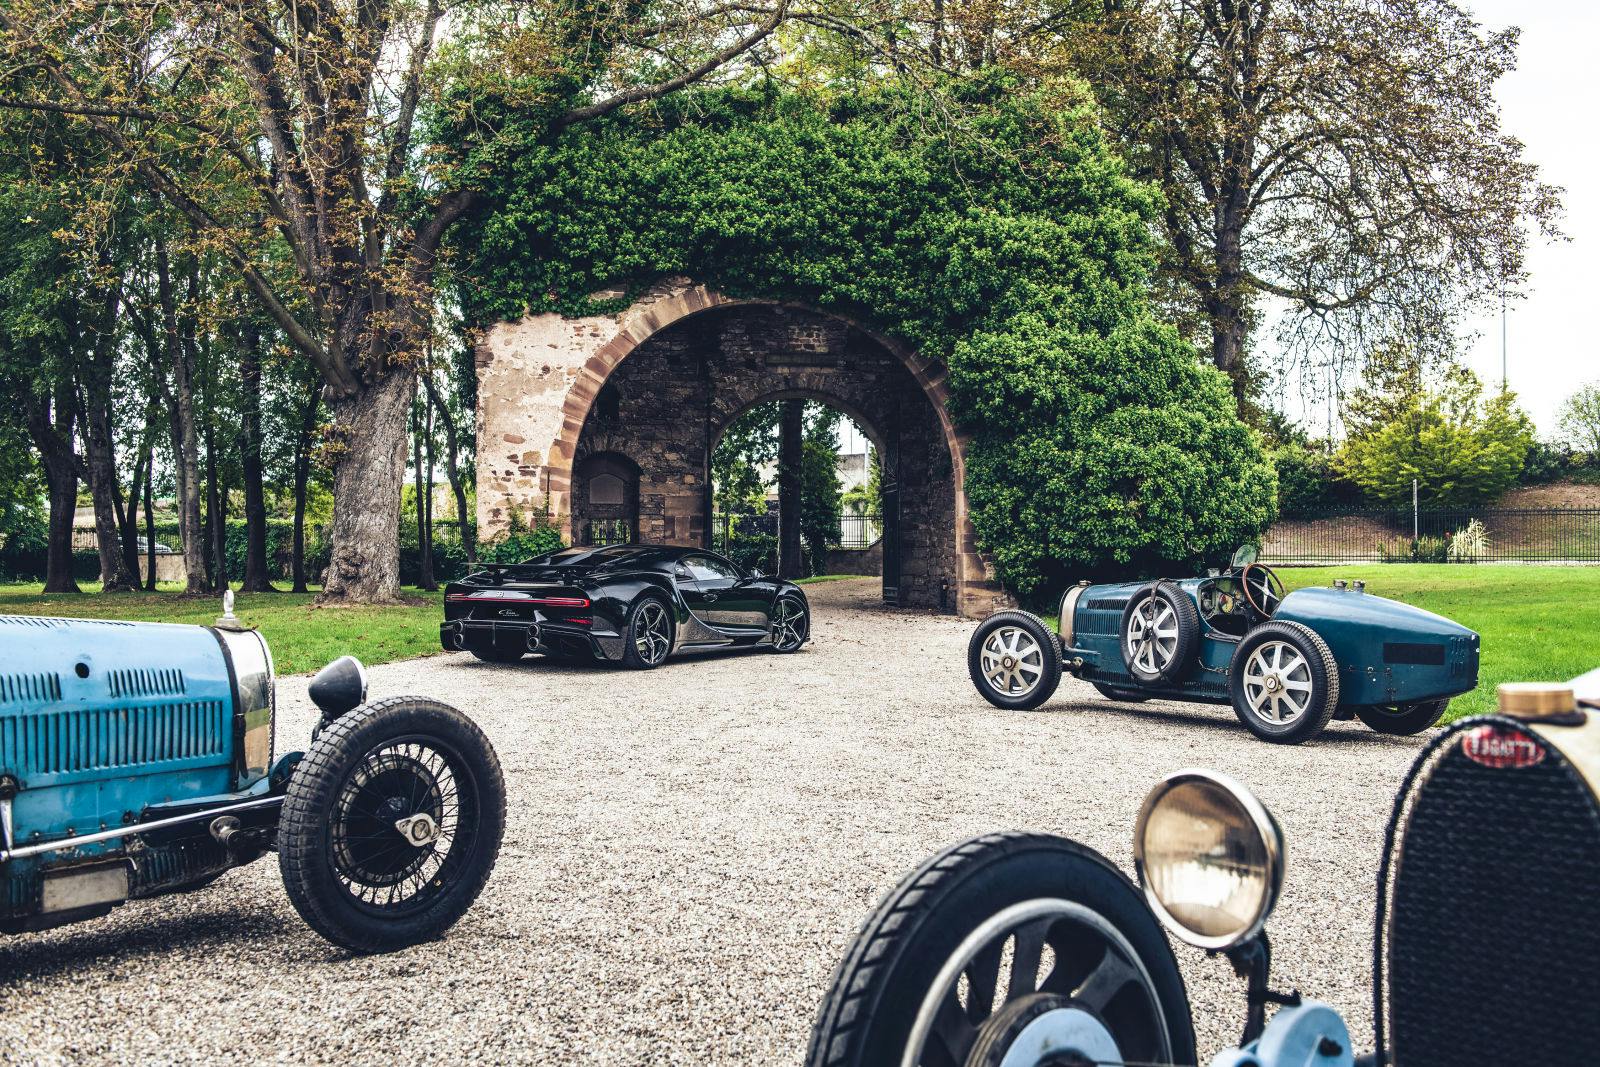 A sense of history surrounds the Château, brimming with nearly a century of Bugatti heritage.